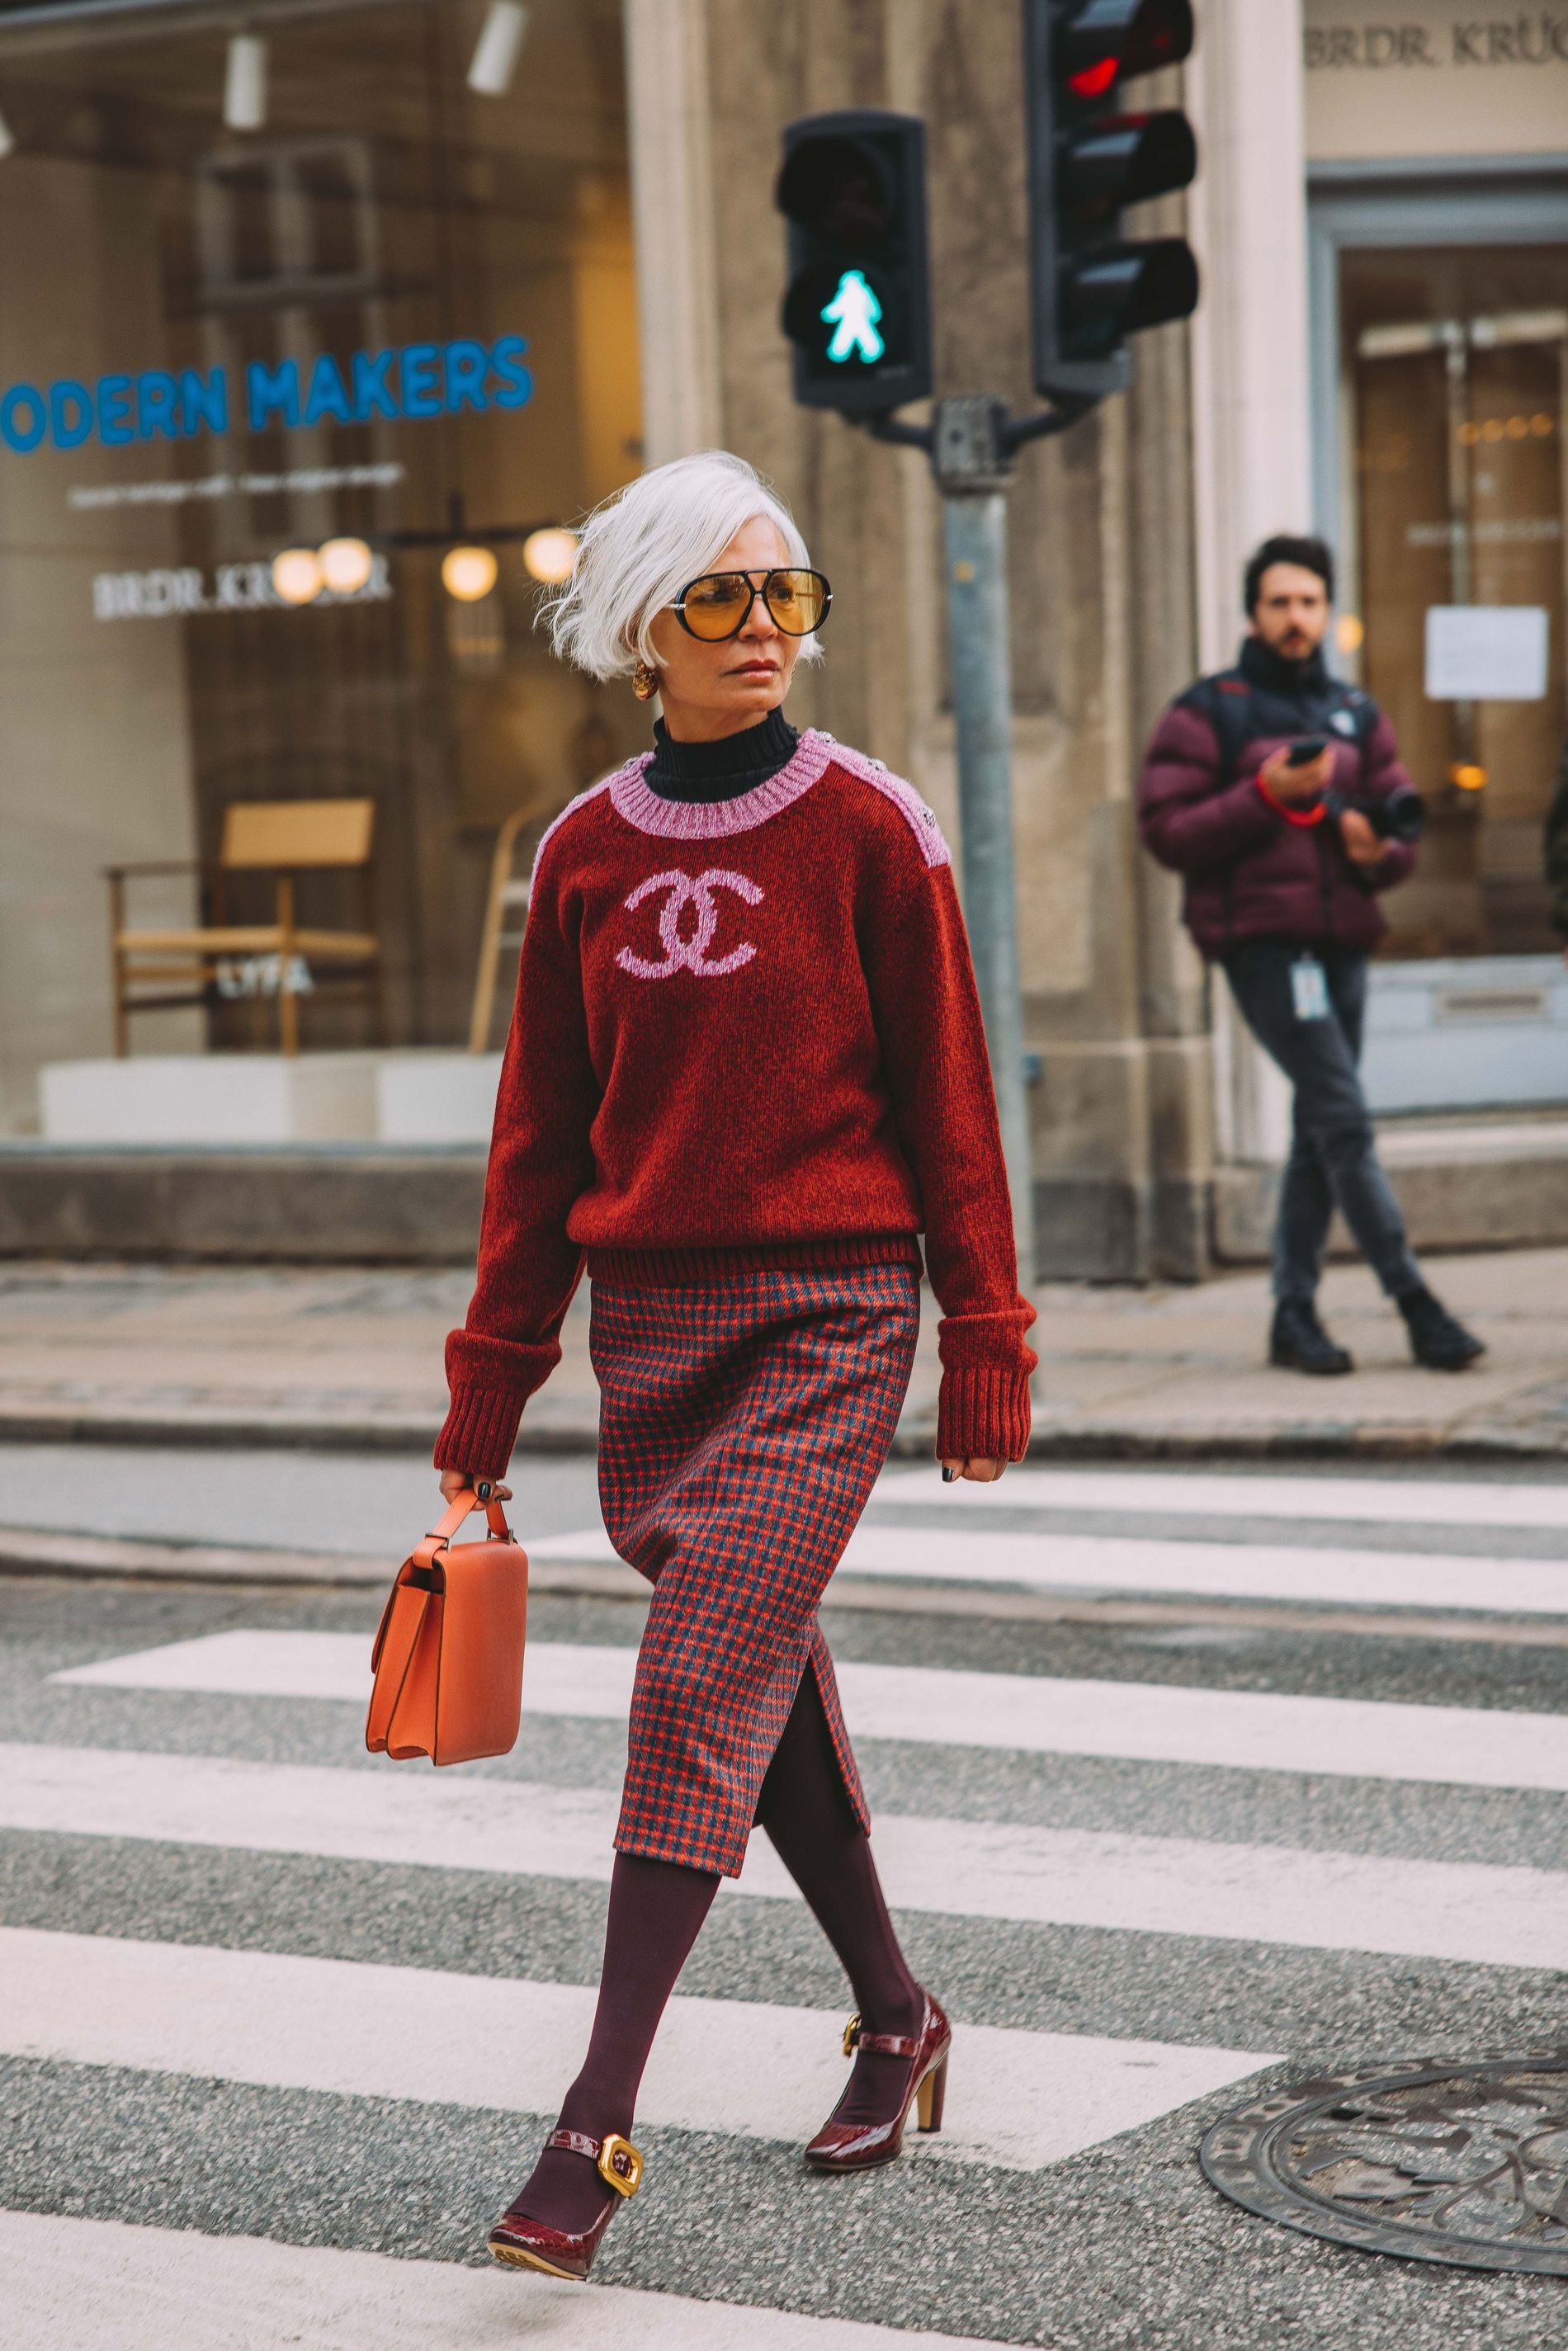 A guest at CPHFW poses for a street style photo wearing a pink and red Chanel sweater and a red checkered skirt